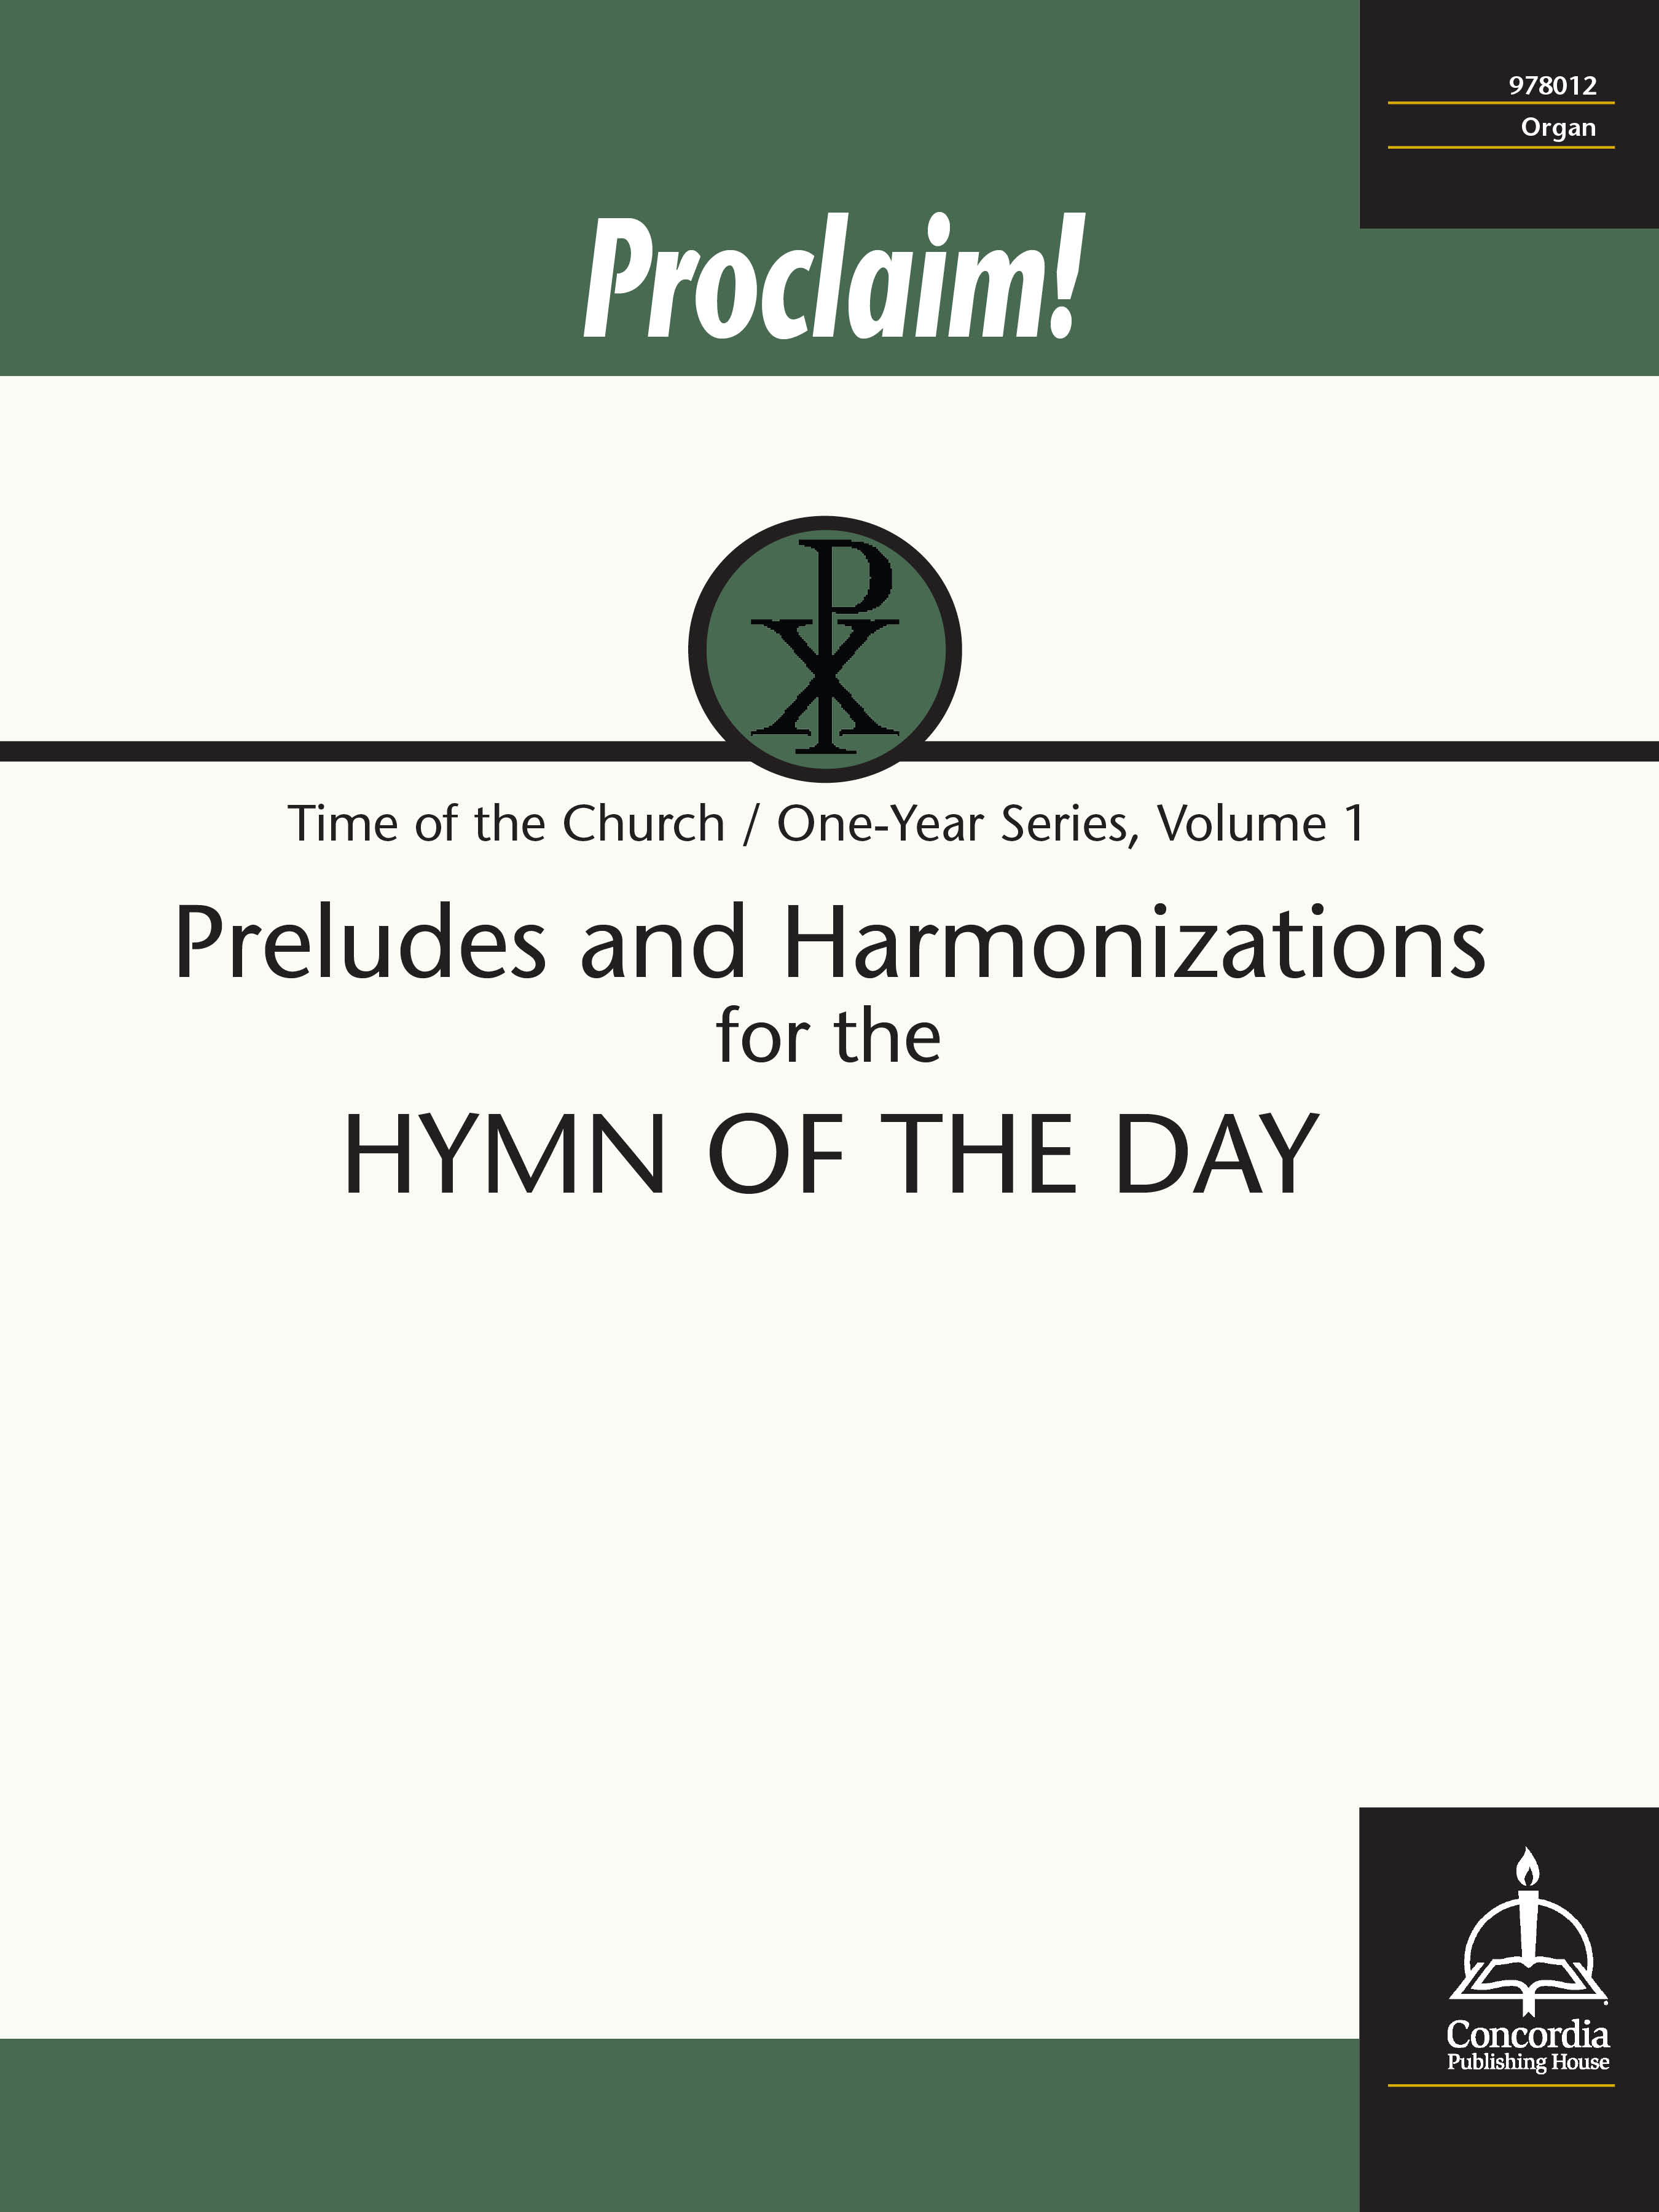 Proclaim! Preludes and Harmonizations for the Hymn of the Day